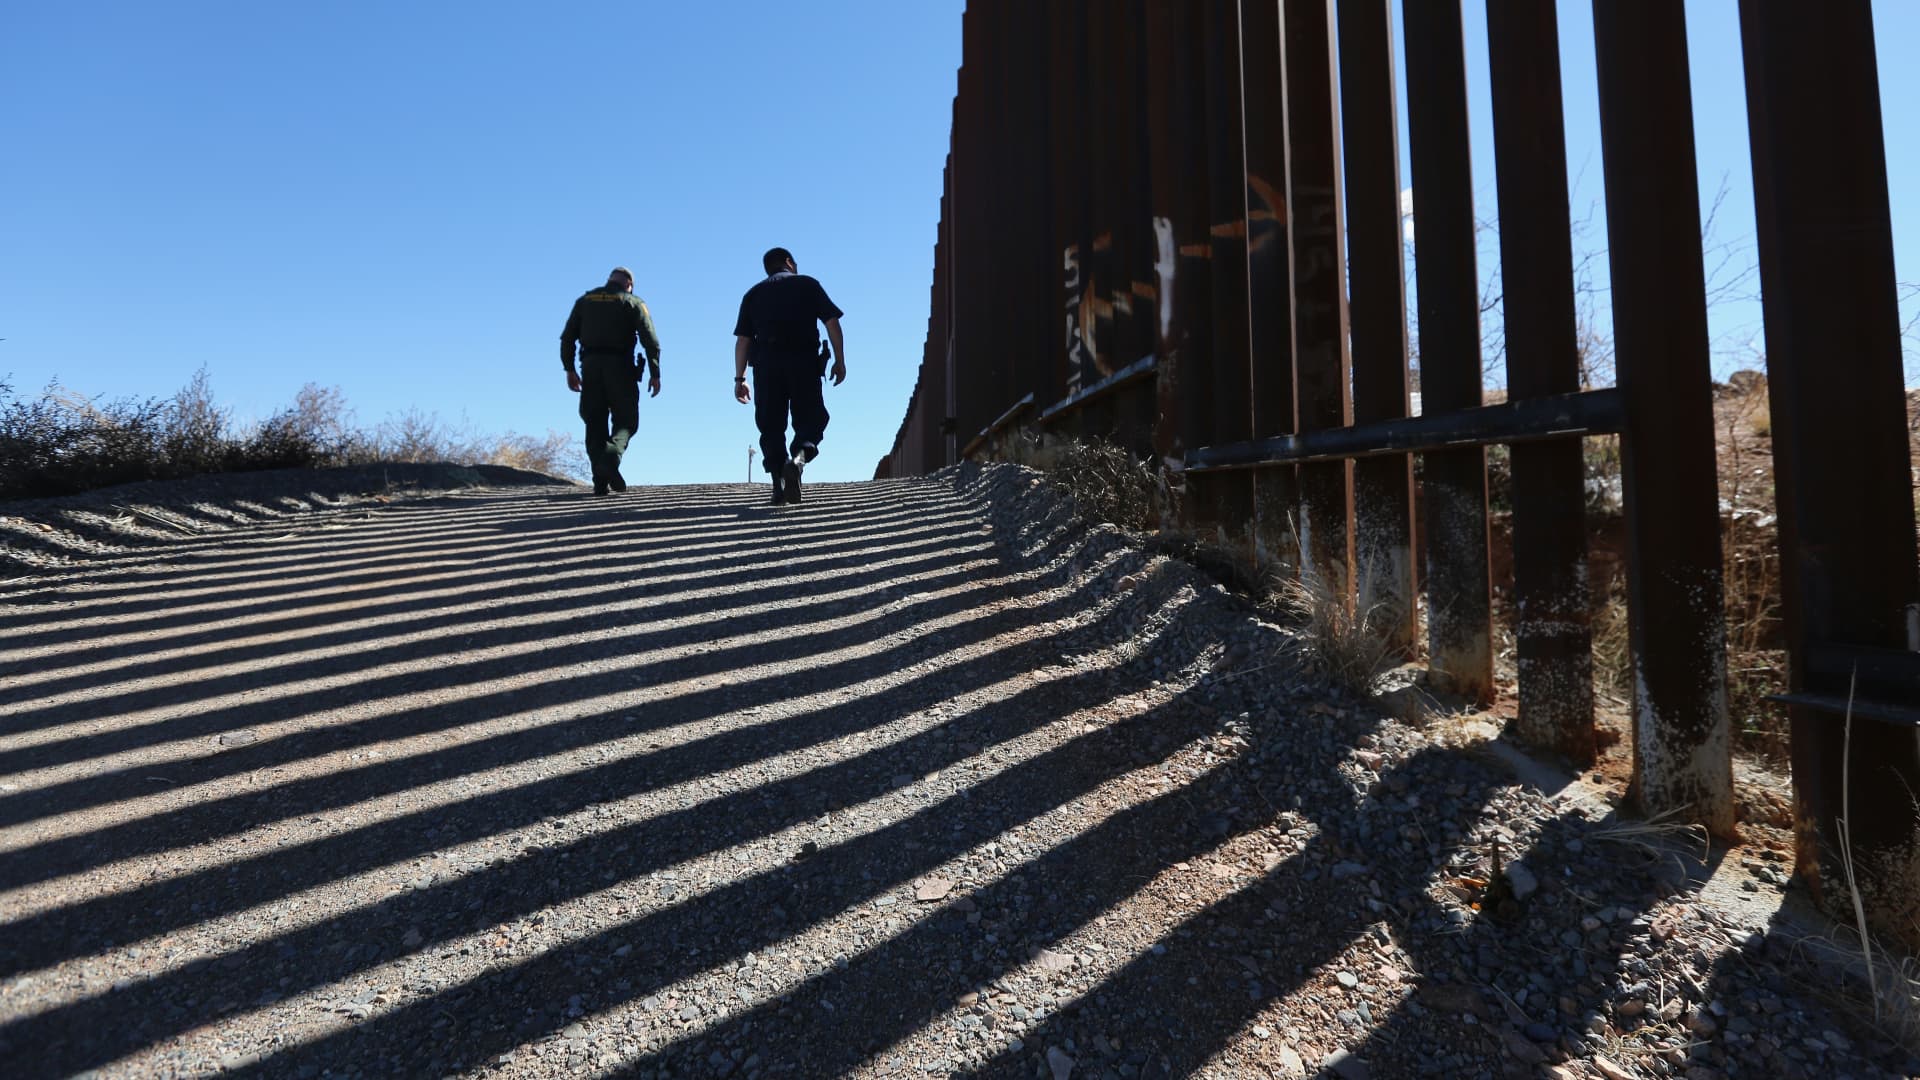 Estimating the true cost — and worth — of Trump's border wall